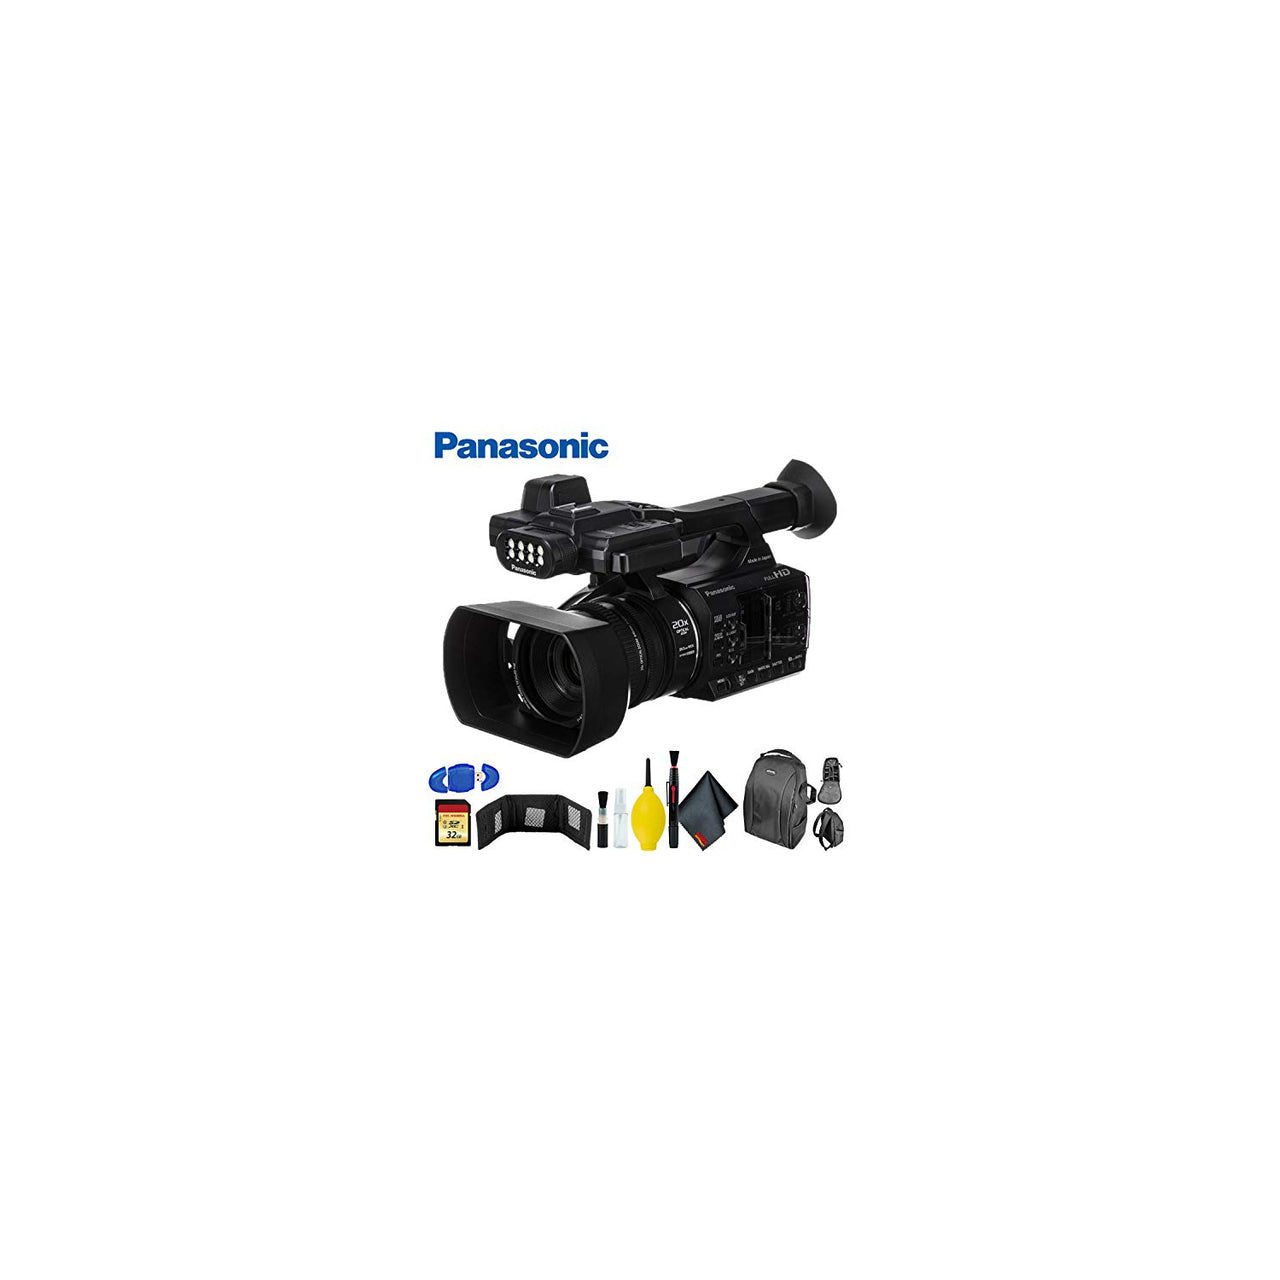 Panasonic AG-AC30 Full HD Camcorder with Touch Panel LCD Screen & Built-in LED Light - Deluxe Bundle